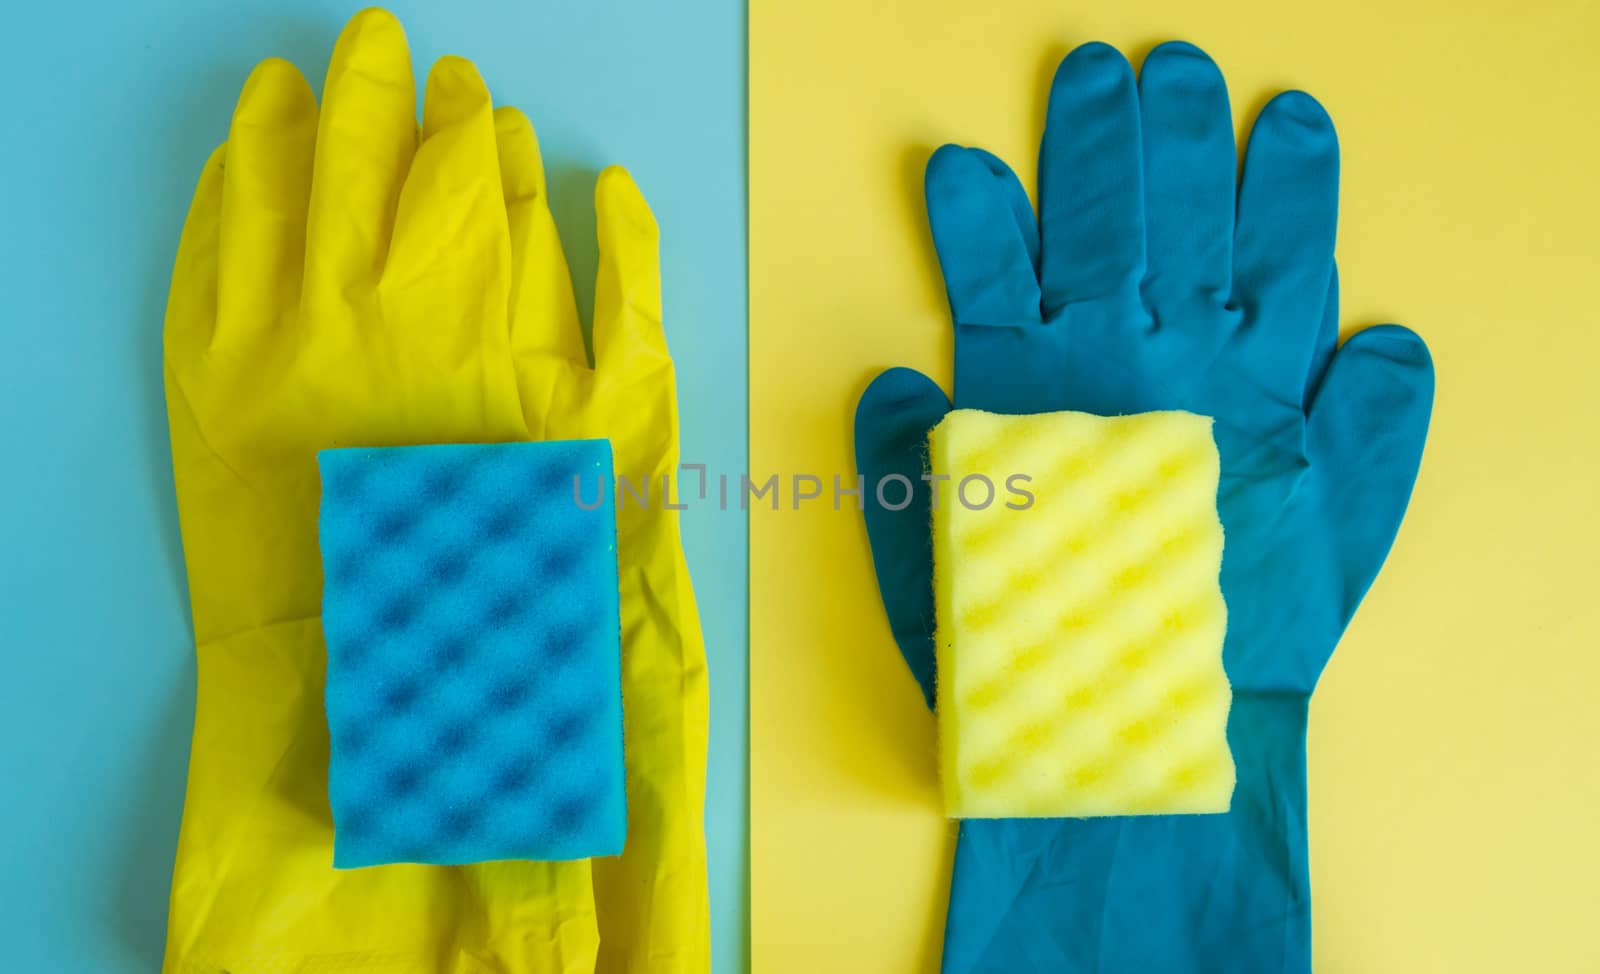 Professional house cleaning concept, spring cleaning accessories, two pairs of rubber gloves and sponges on double yellow-blue background, flat lay.